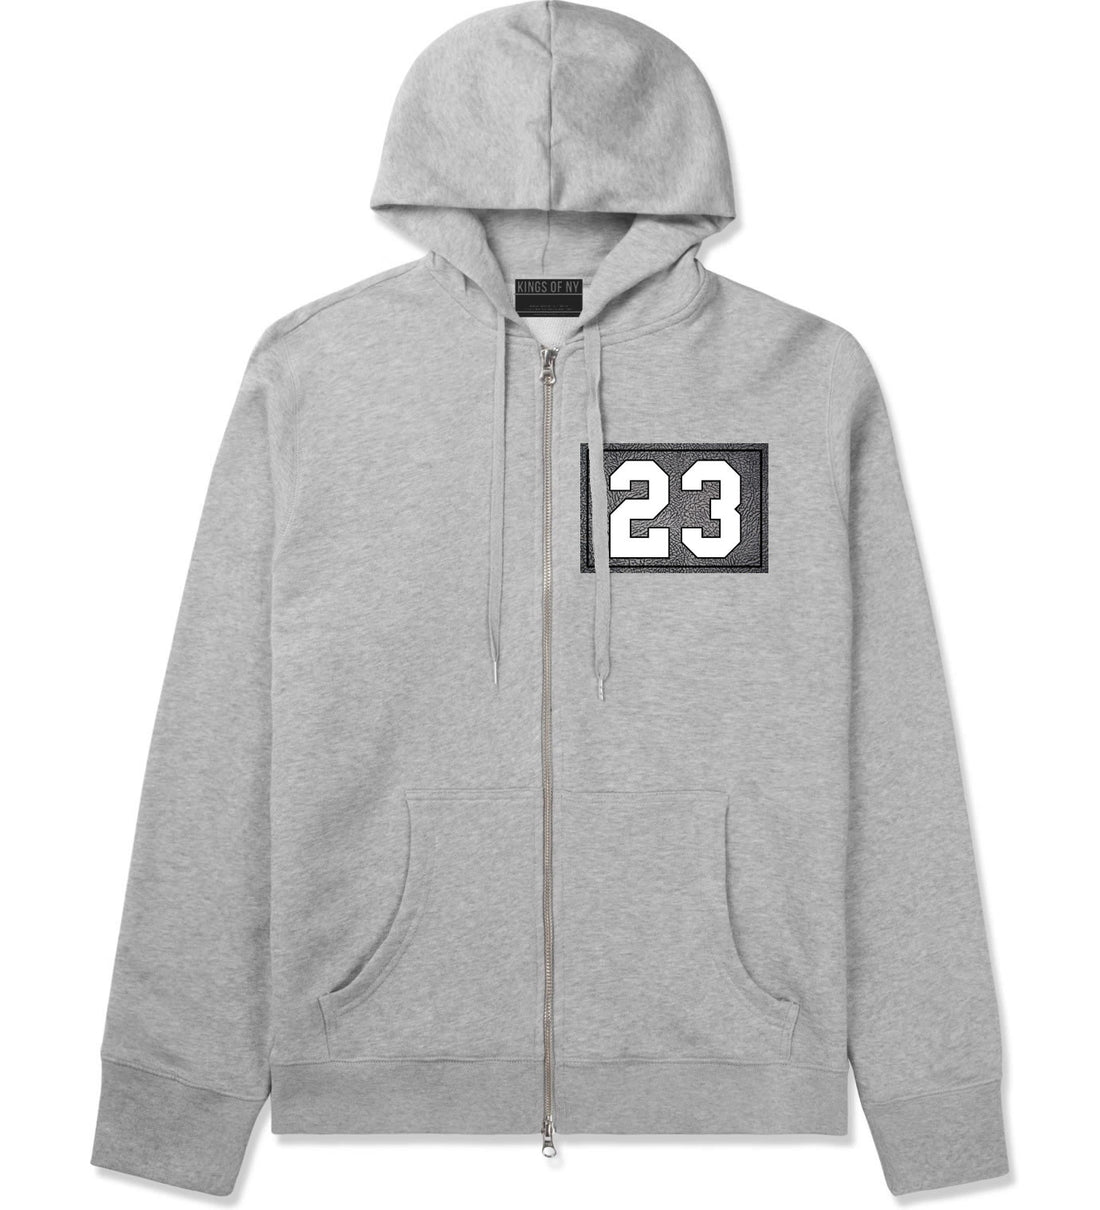 23 Cement Jersey Zip Up Hoodie in Grey By Kings Of NY